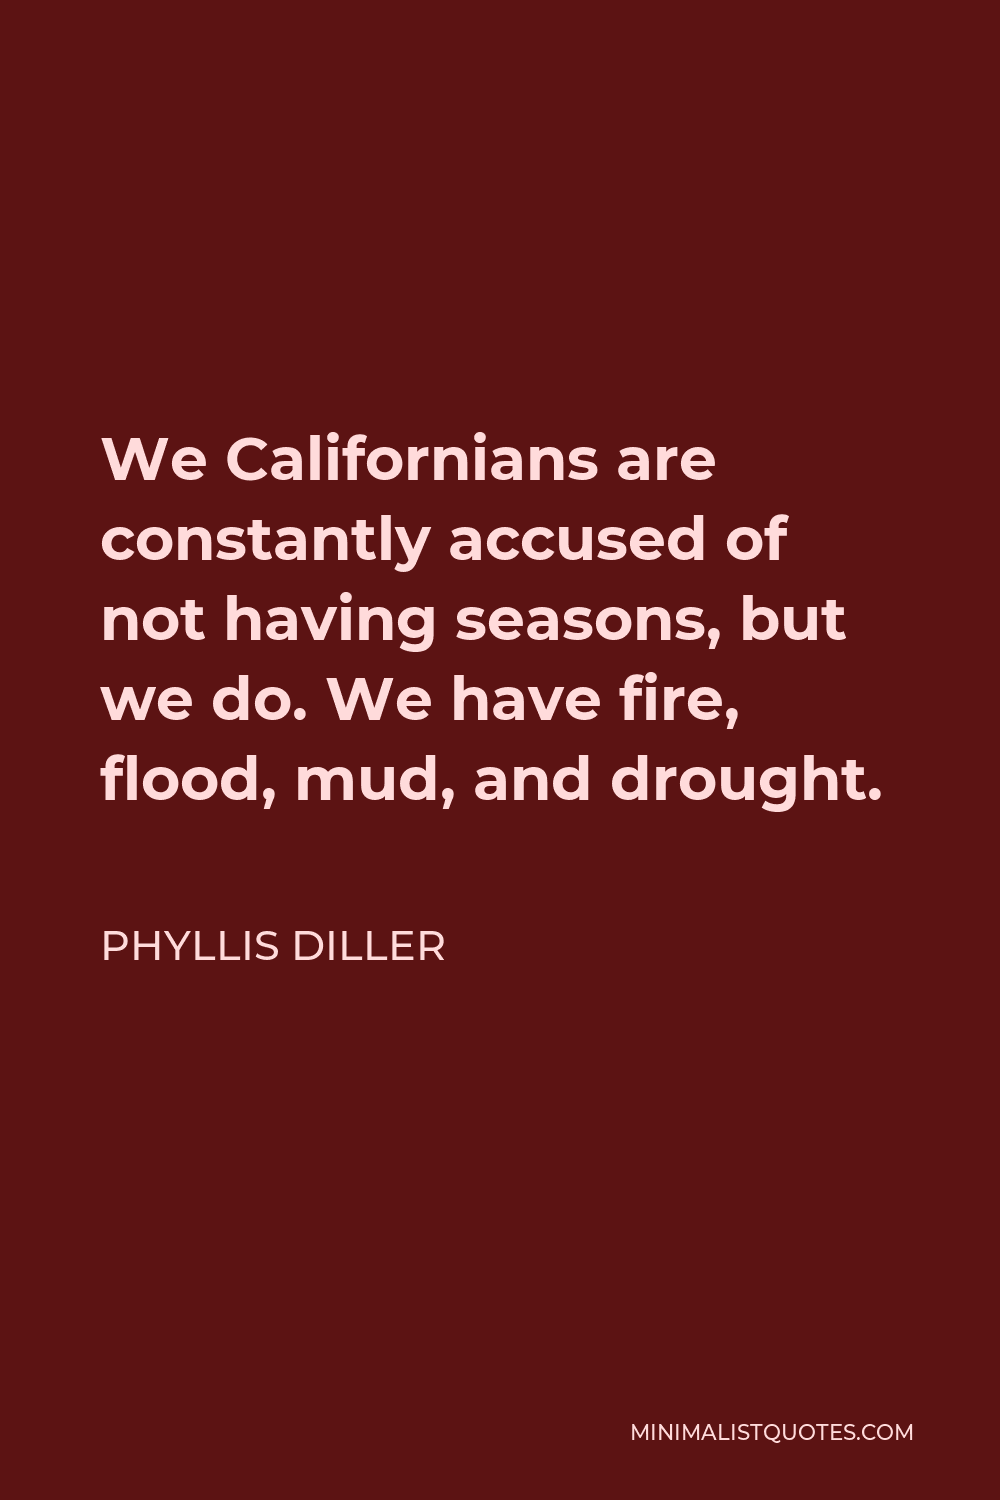 Phyllis Diller Quote - We Californians are constantly accused of not having seasons, but we do. We have fire, flood, mud, and drought.